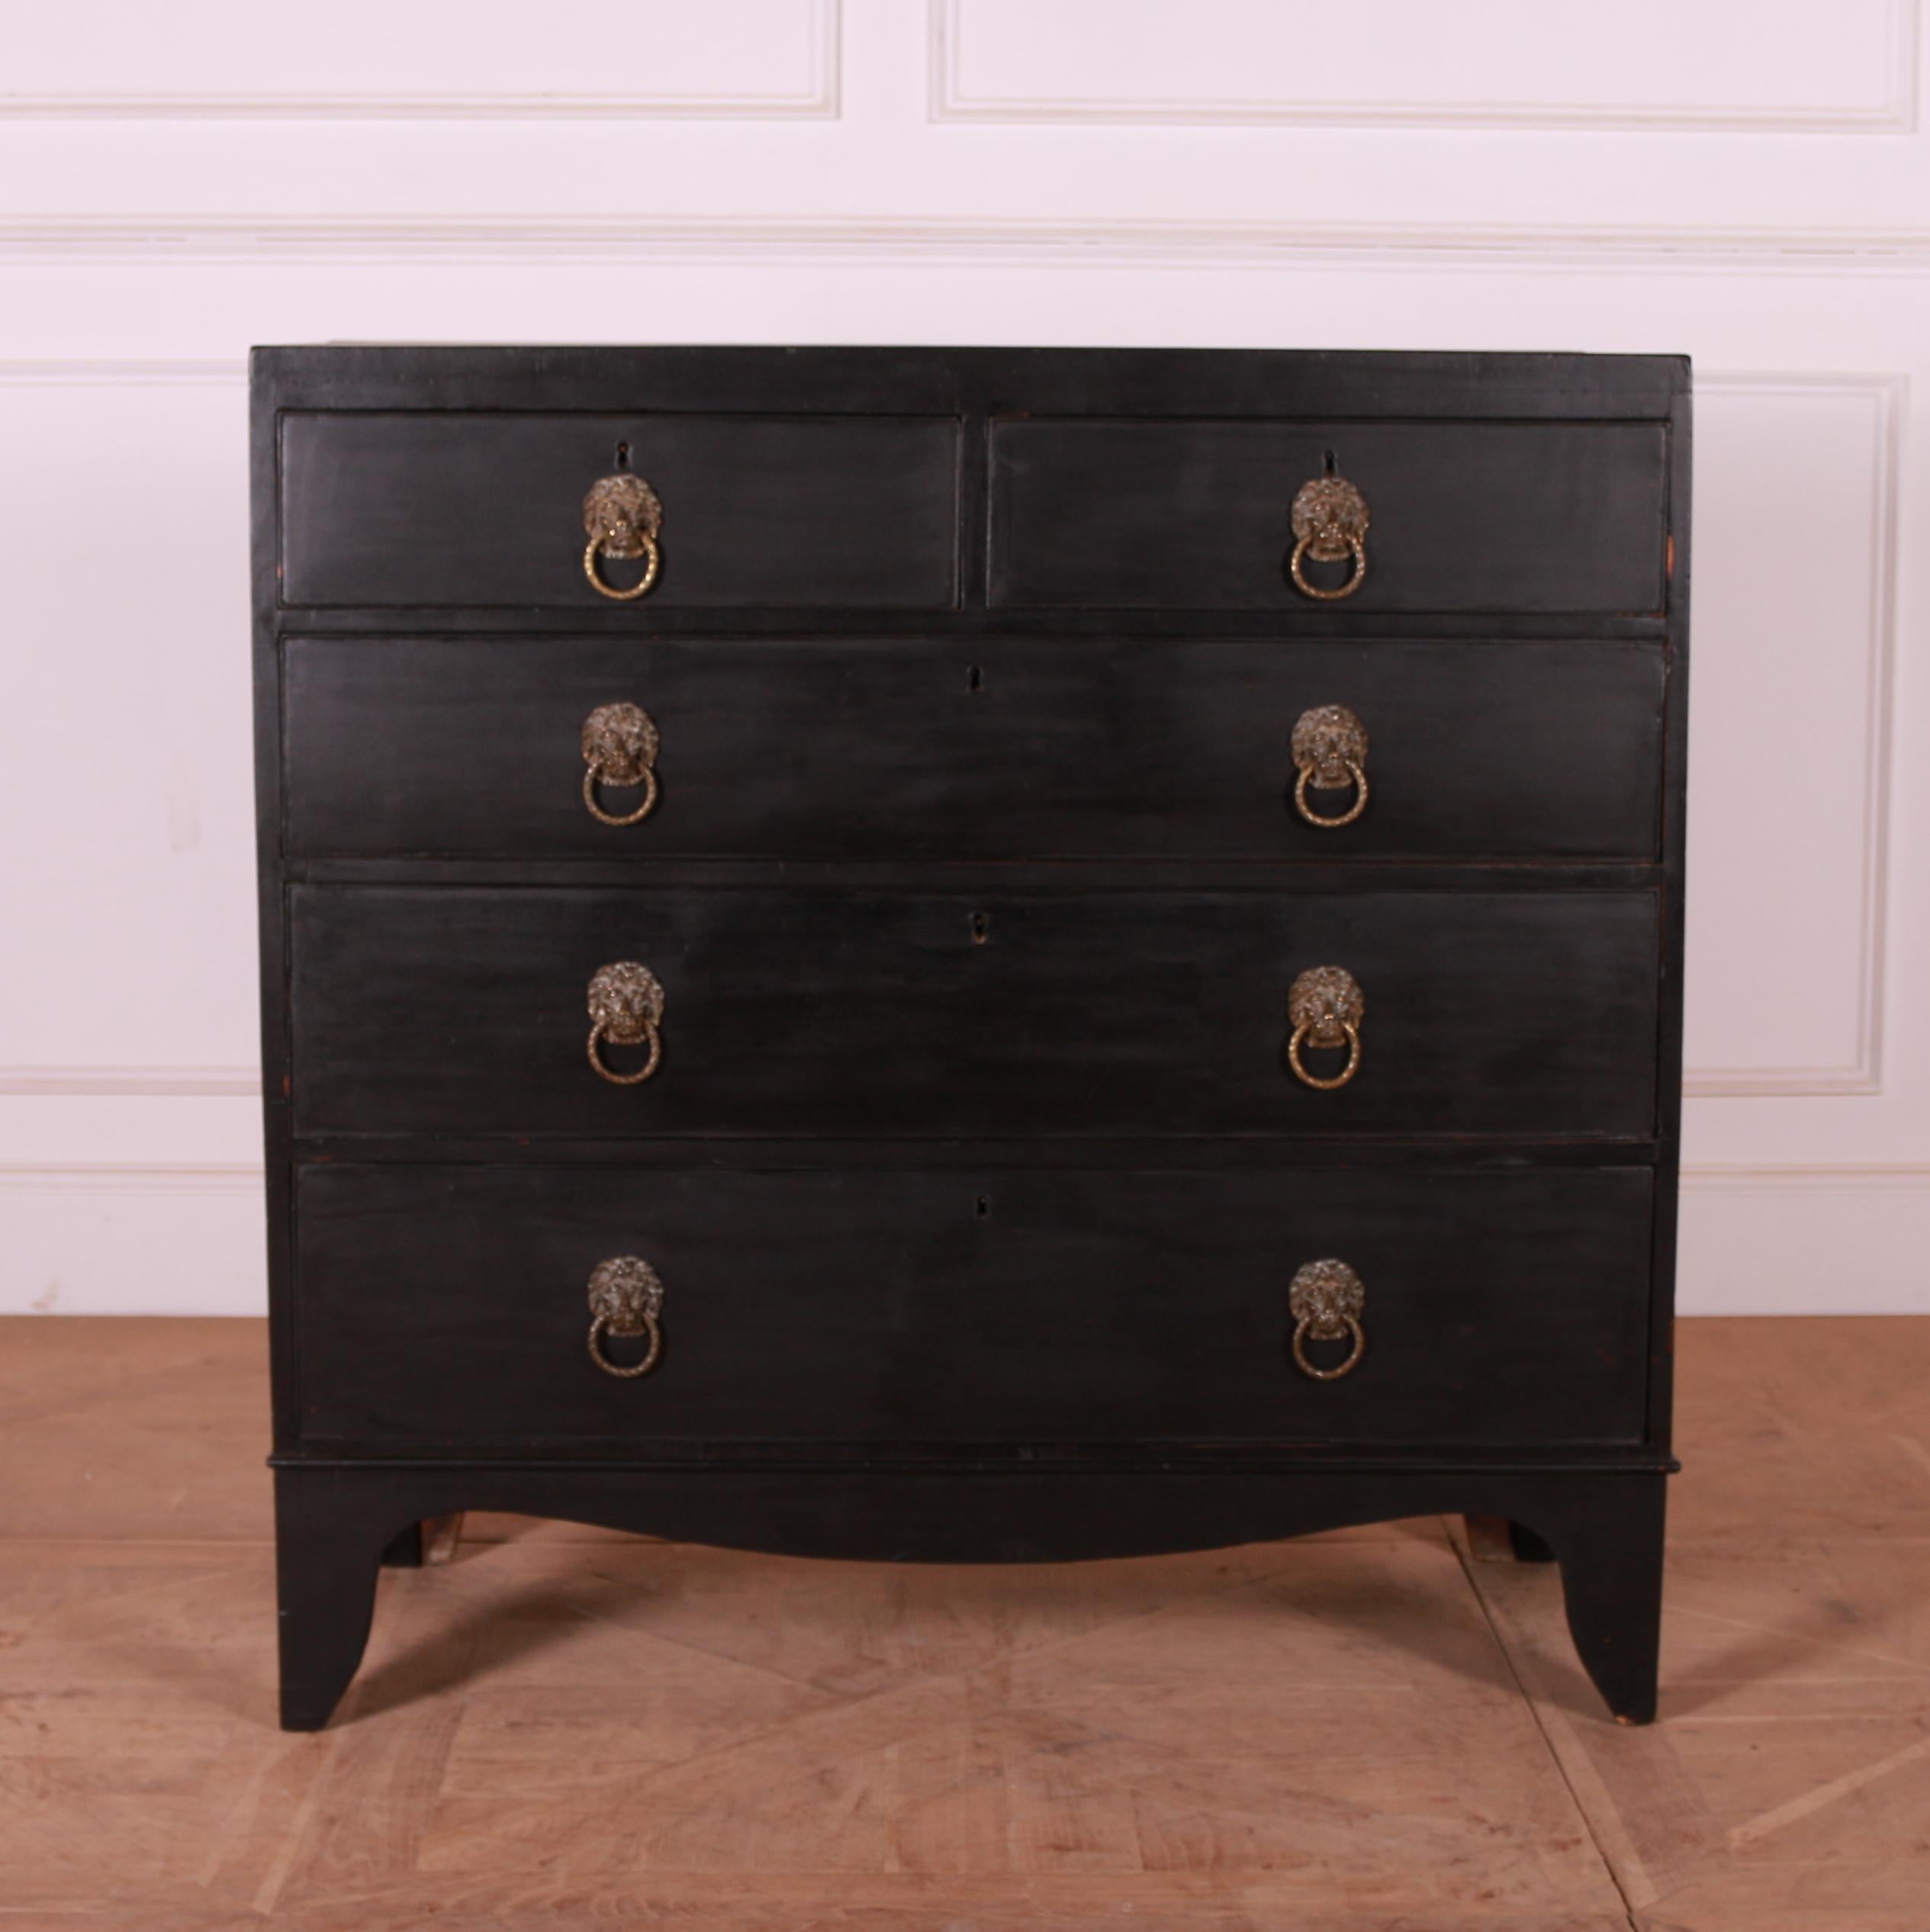 Early 19th C English painted oak chest of drawers. 1830.

Reference: 7708

Dimensions
42 inches (107 cms) Wide
19 inches (48 cms) Deep
41.5 inches (105 cms) High